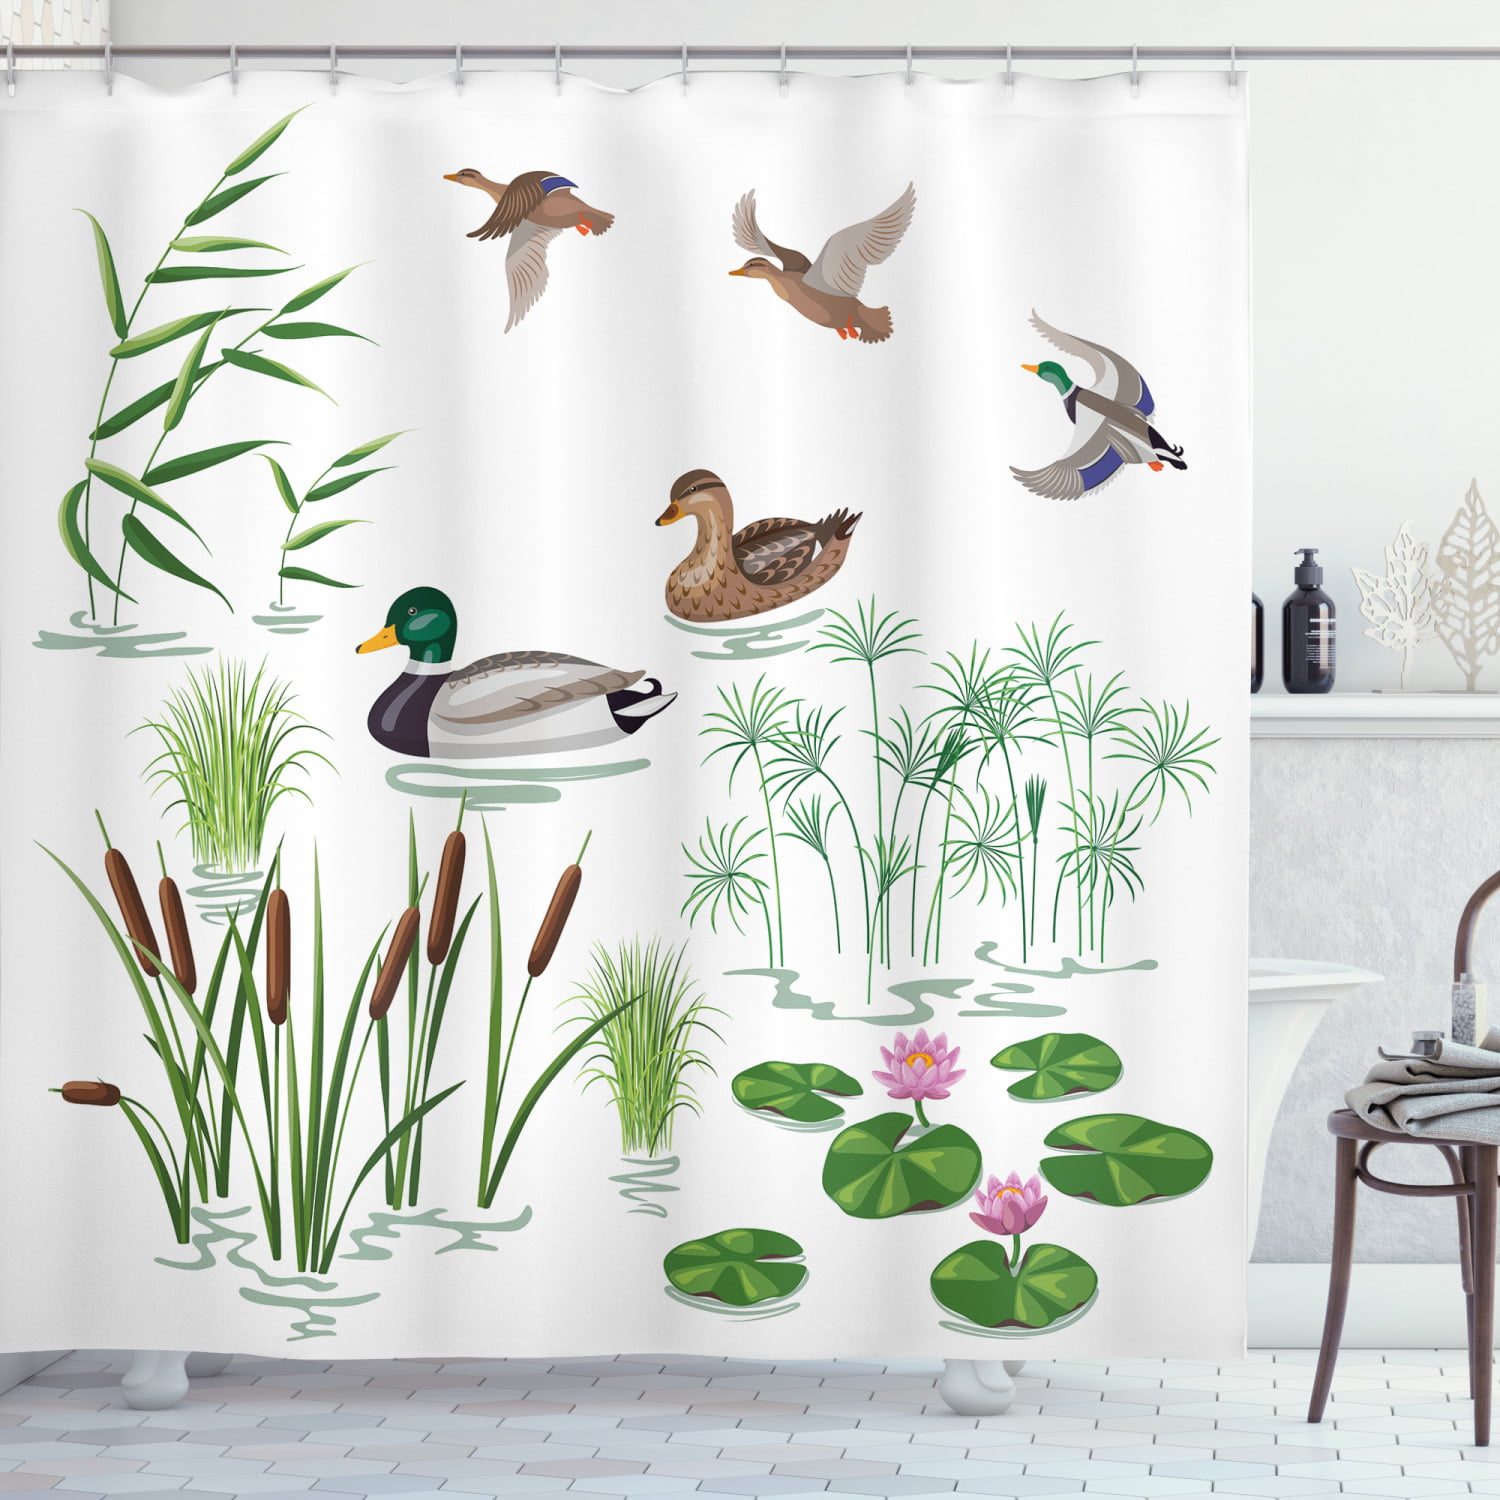 Rubber Duck Shower Curtain Lake, Rubber Duck Shower Curtain Fabric